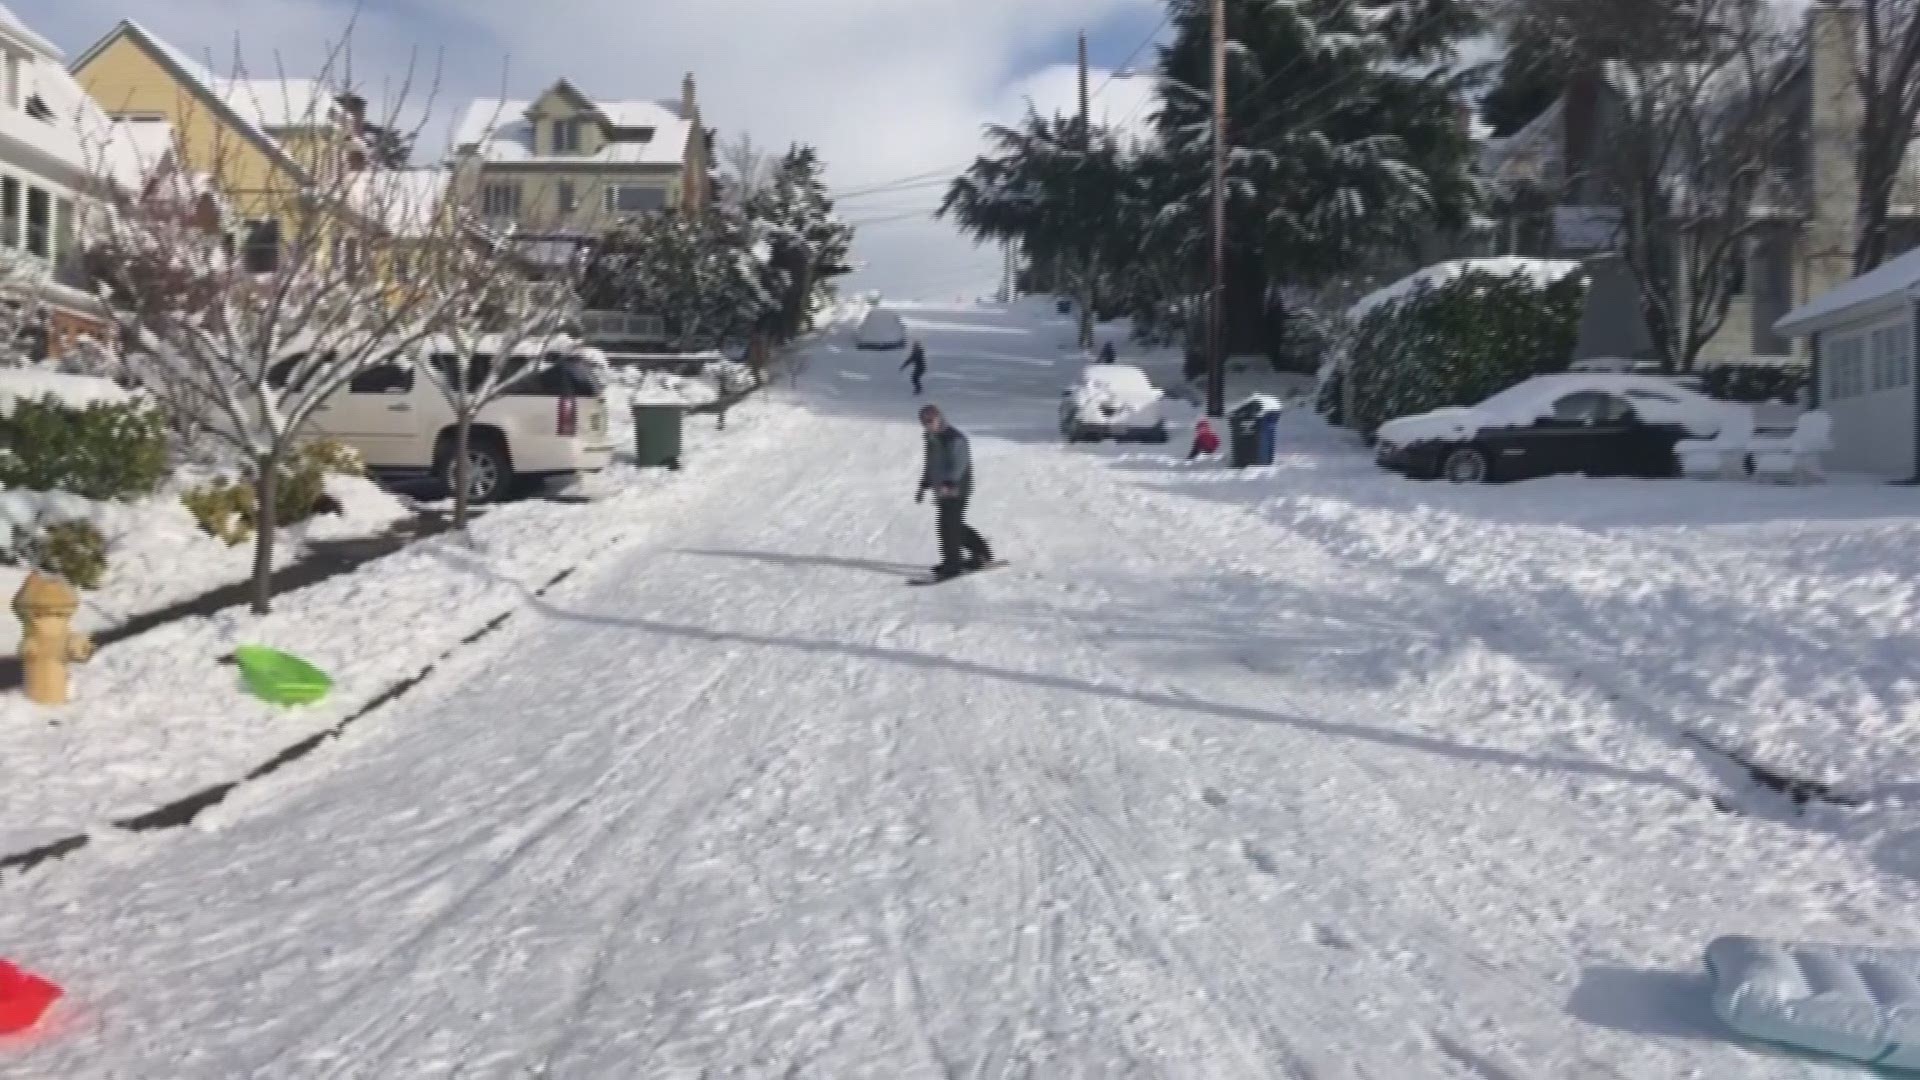 Snow-socked residents of the Pacific Northwest are finding themselves digging out yet again after a fresh round of storms, with an additional punch to come early this week.